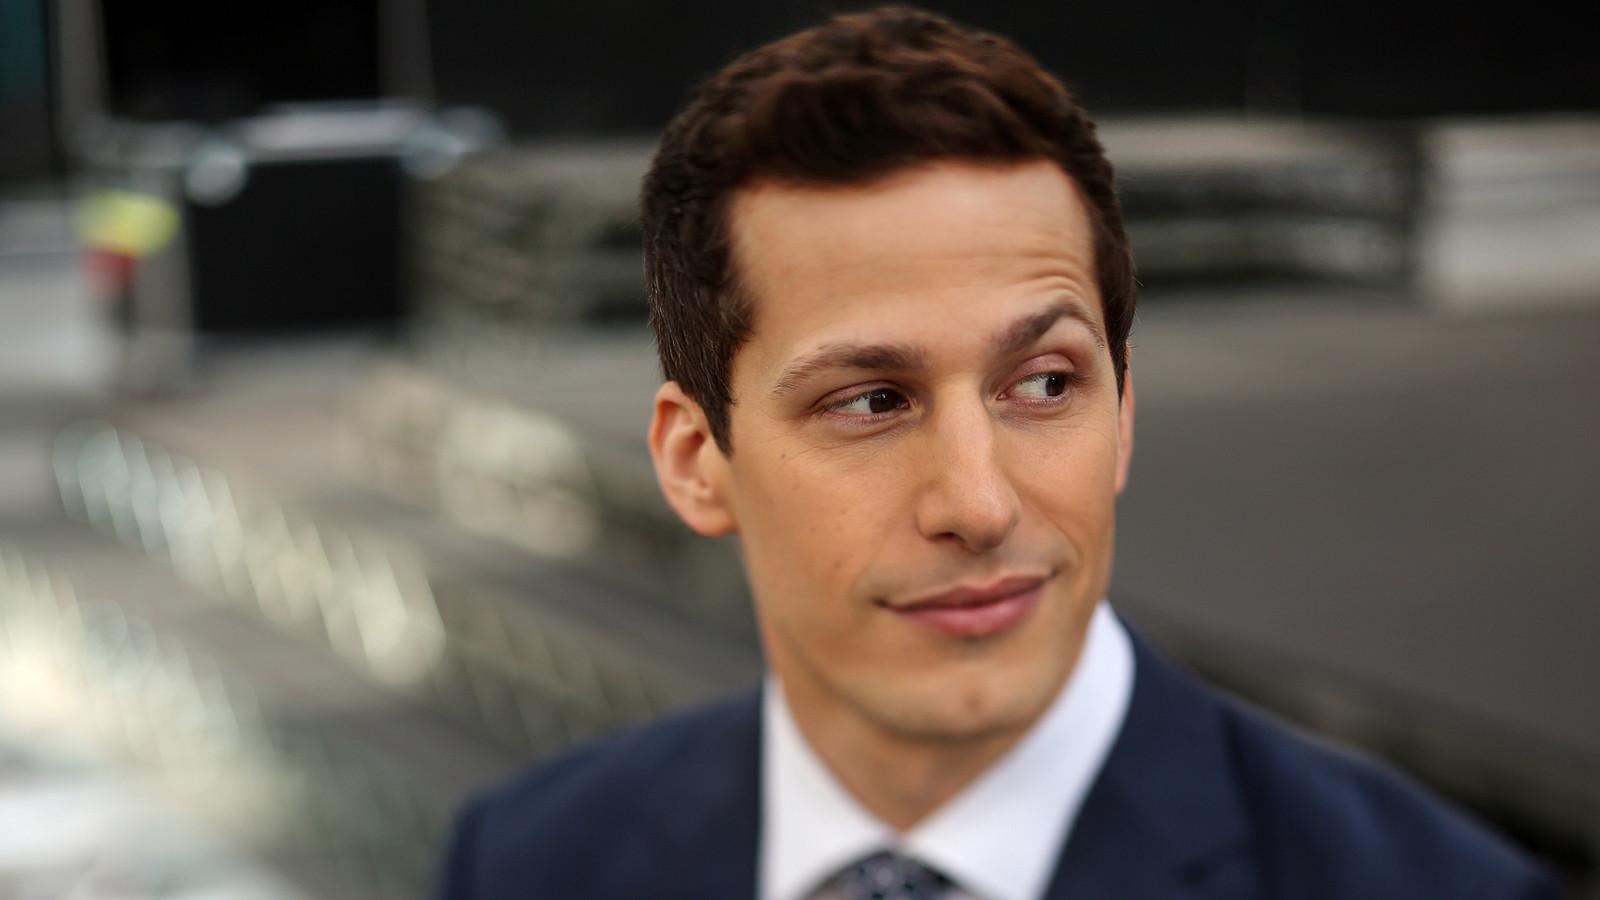 Hire Comedian Andy Samberg. Book Andy Samberg. Stand Up Comedian